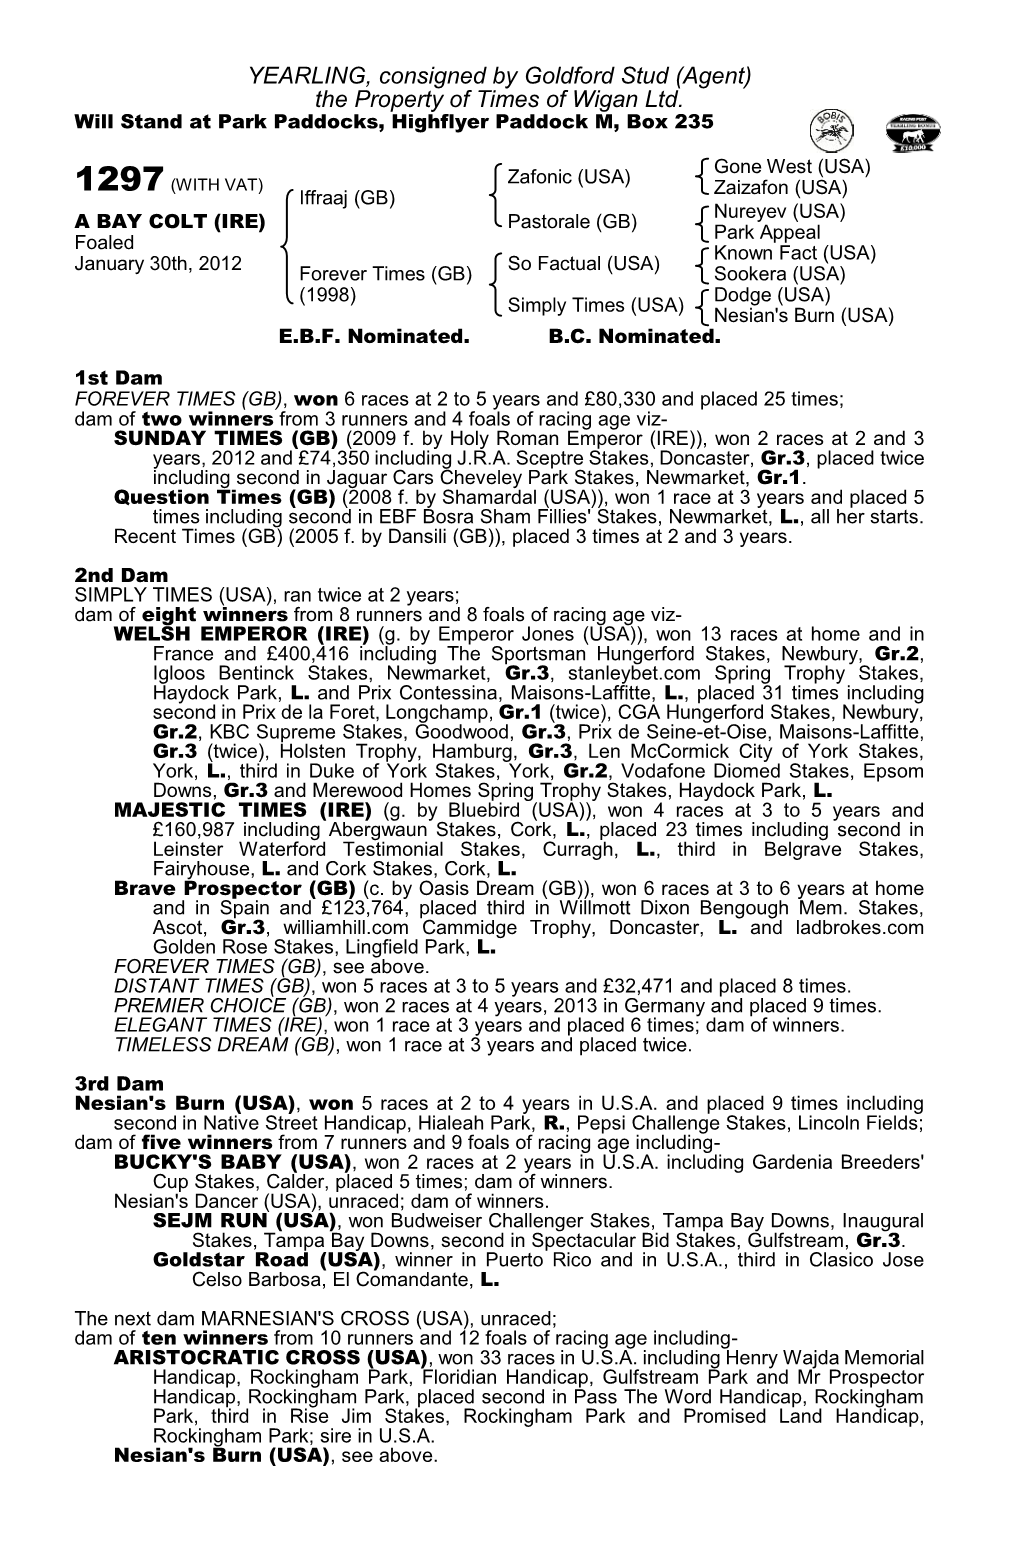 YEARLING, Consigned by Goldford Stud (Agent) the Property of Times of Wigan Ltd